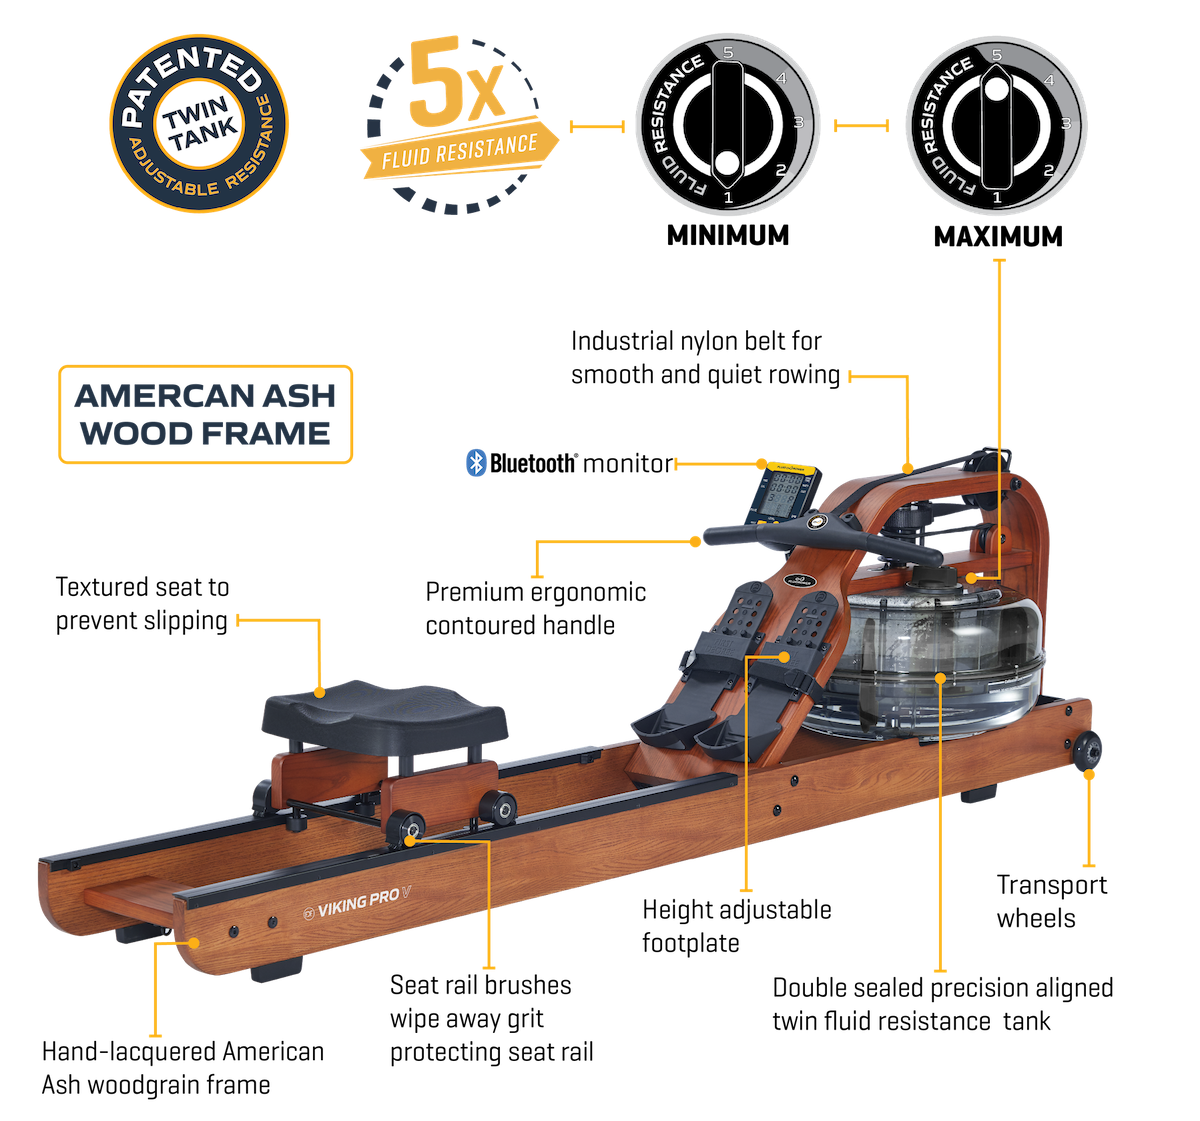 Indoor Fluid Rowing Machine with Computer Display - Viking Pro V with American Ash Wood Brown Rails - 5 levels of resistance